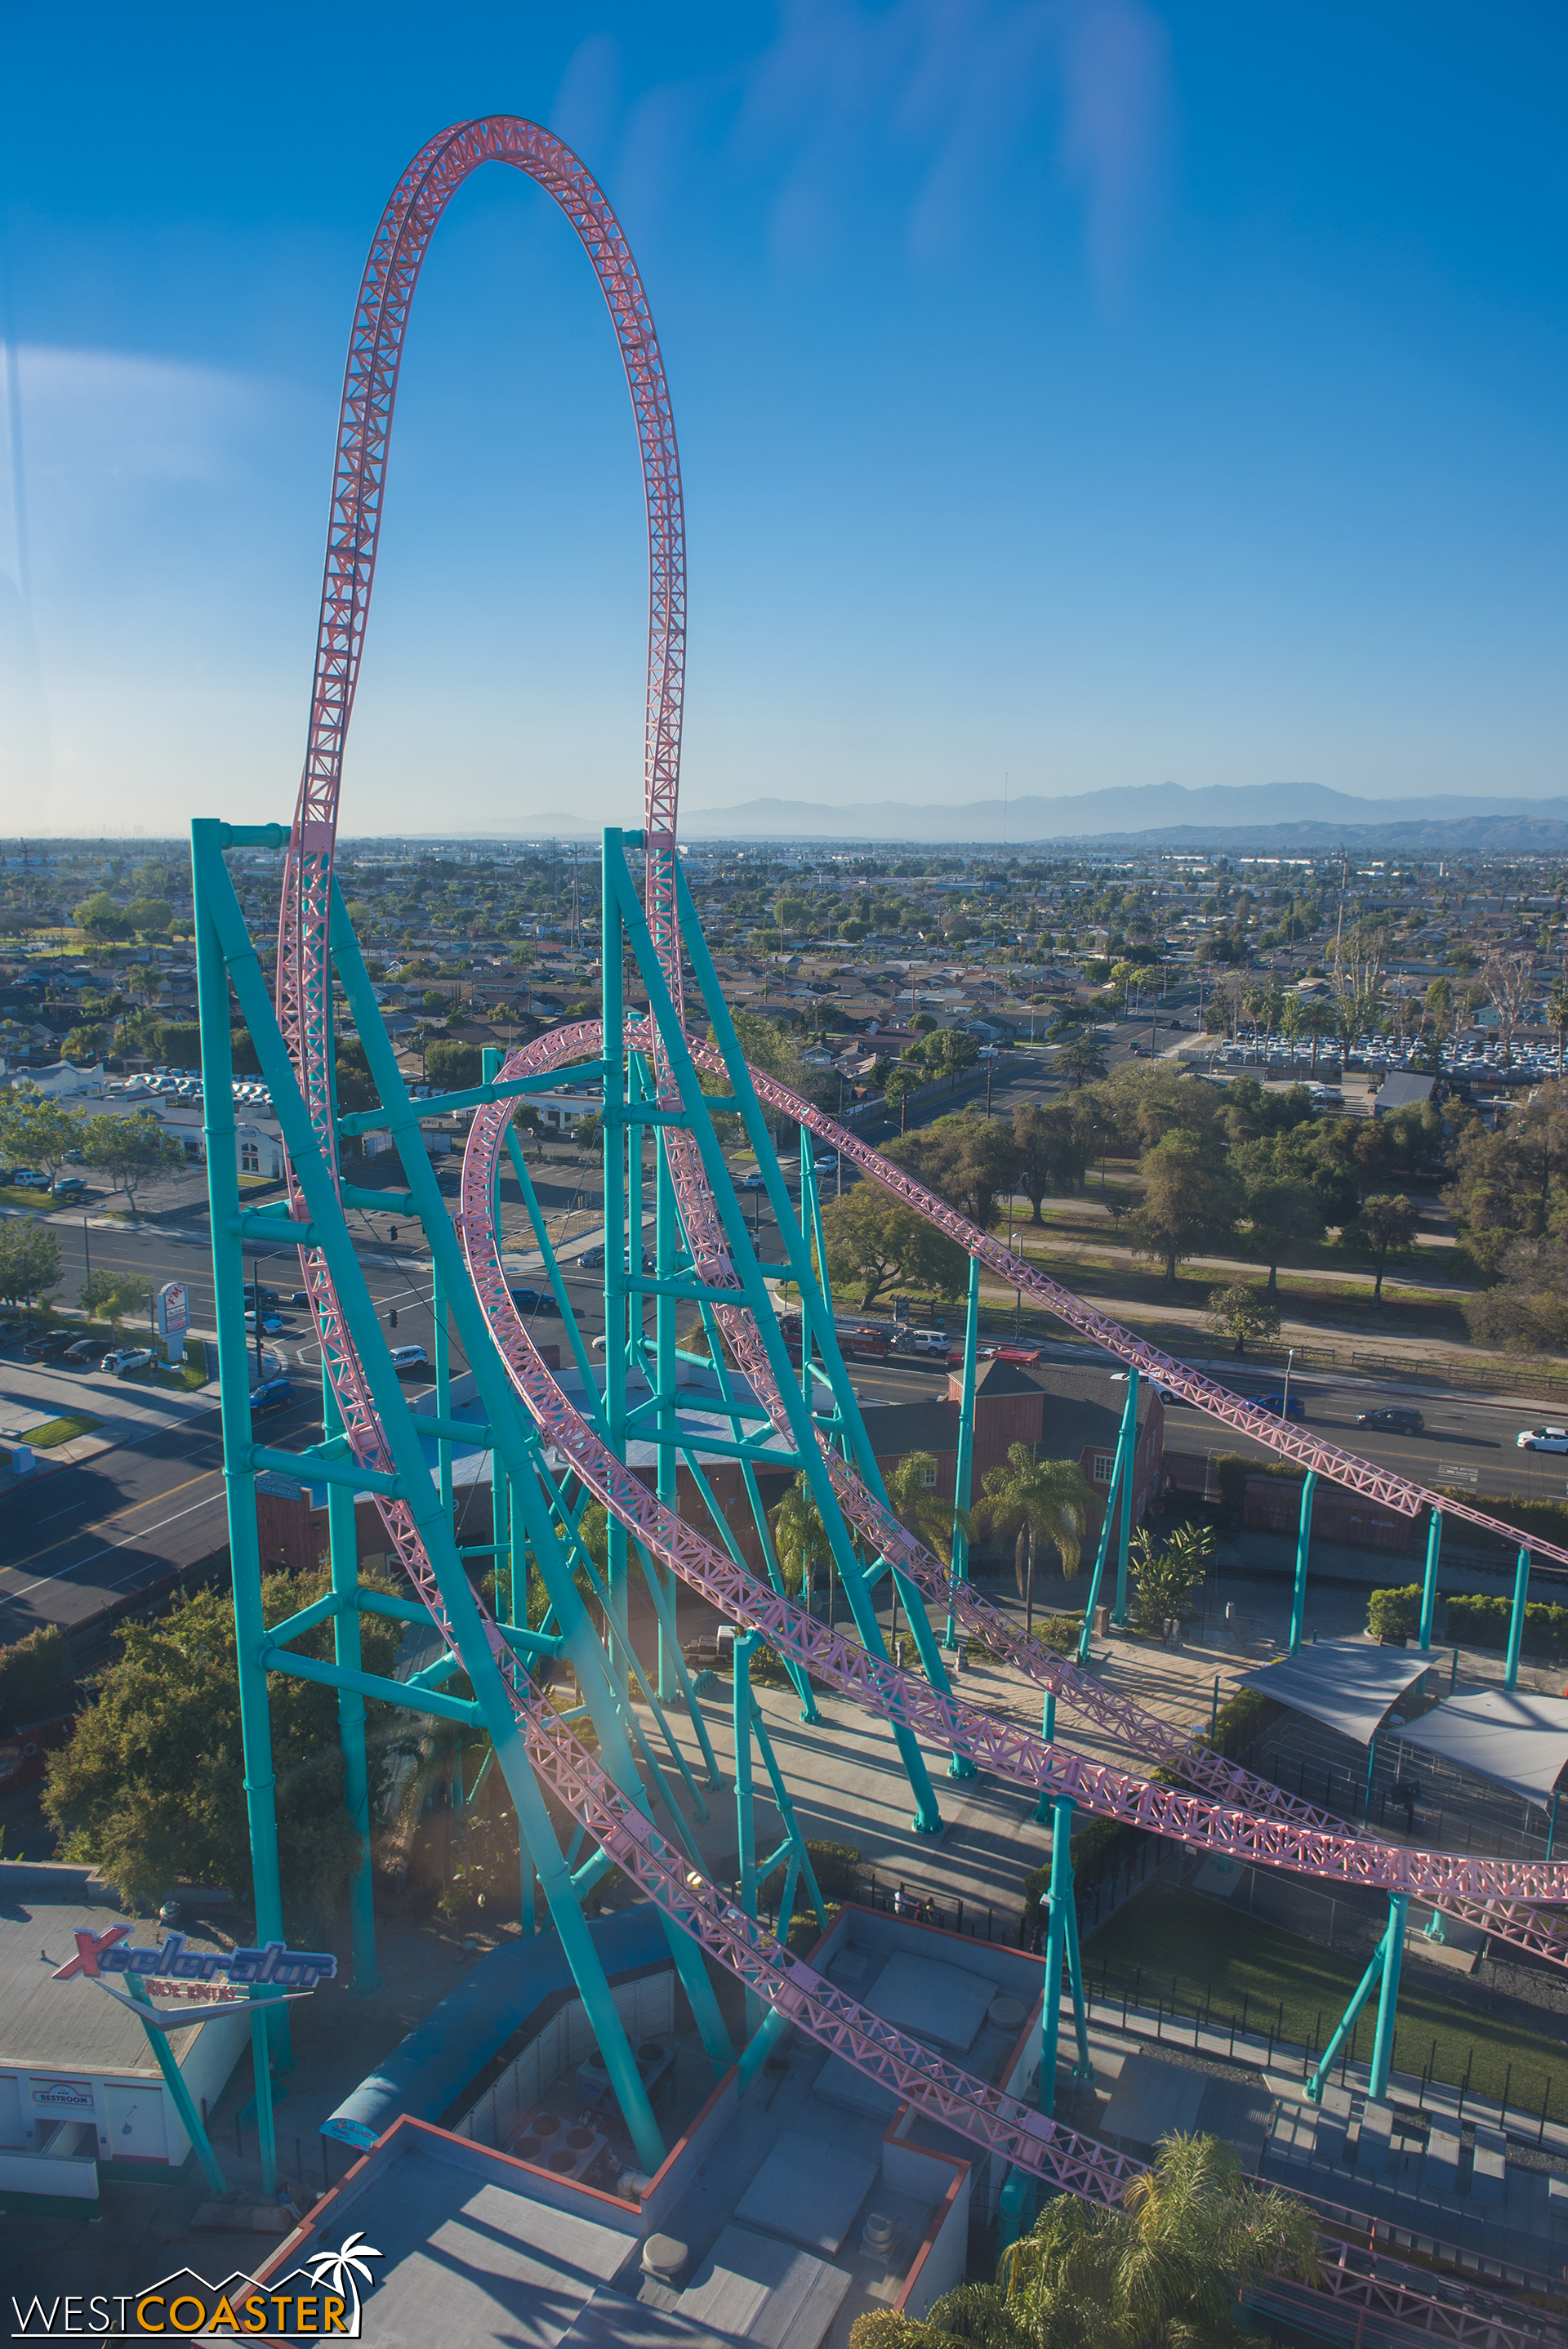  Check out the coaster from high above the park! 